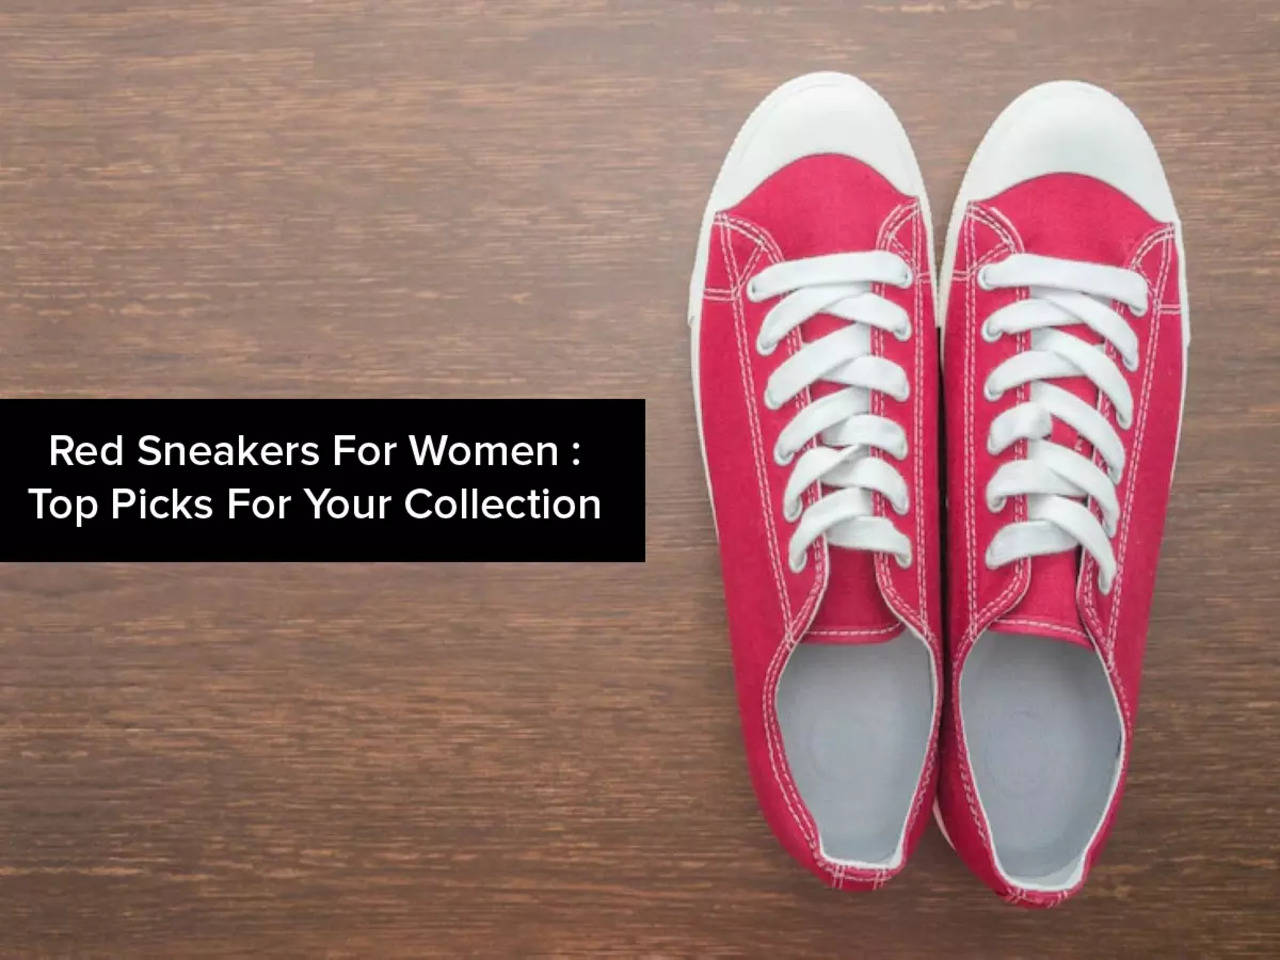 Red sneakers for women: Top picks for your collection - Times of